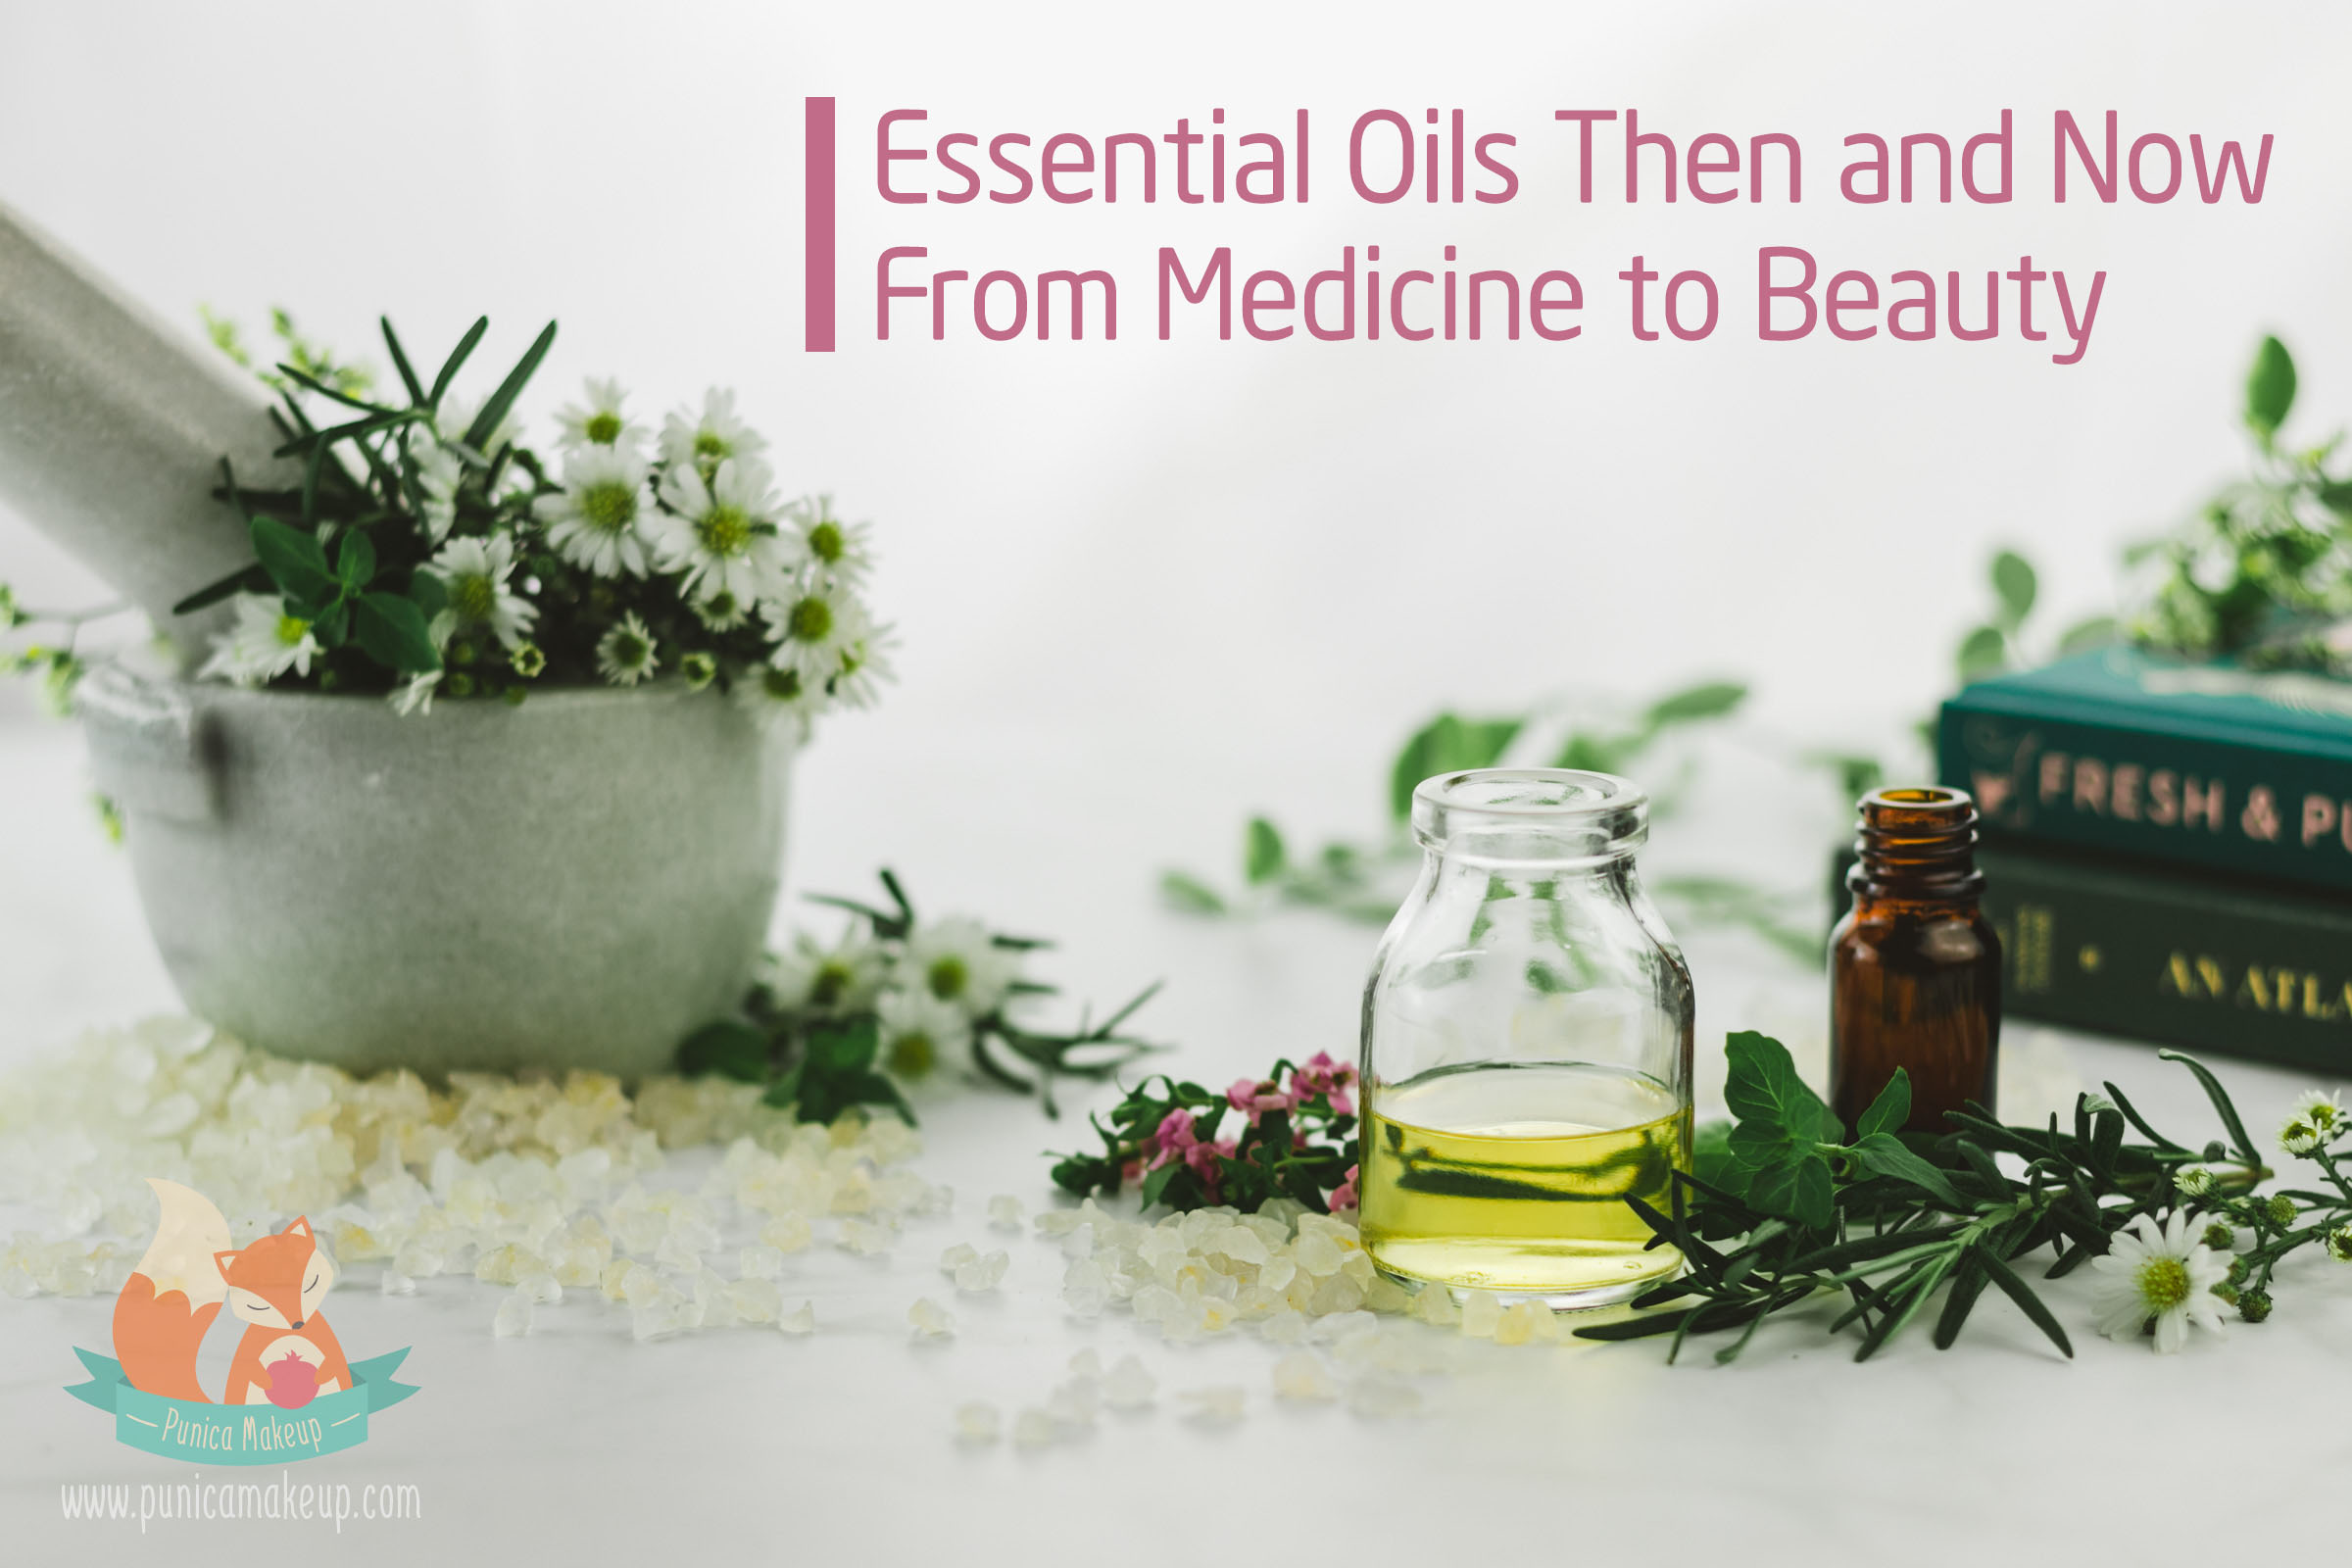 Essential Oils Then and Now: From Medicine to Beauty